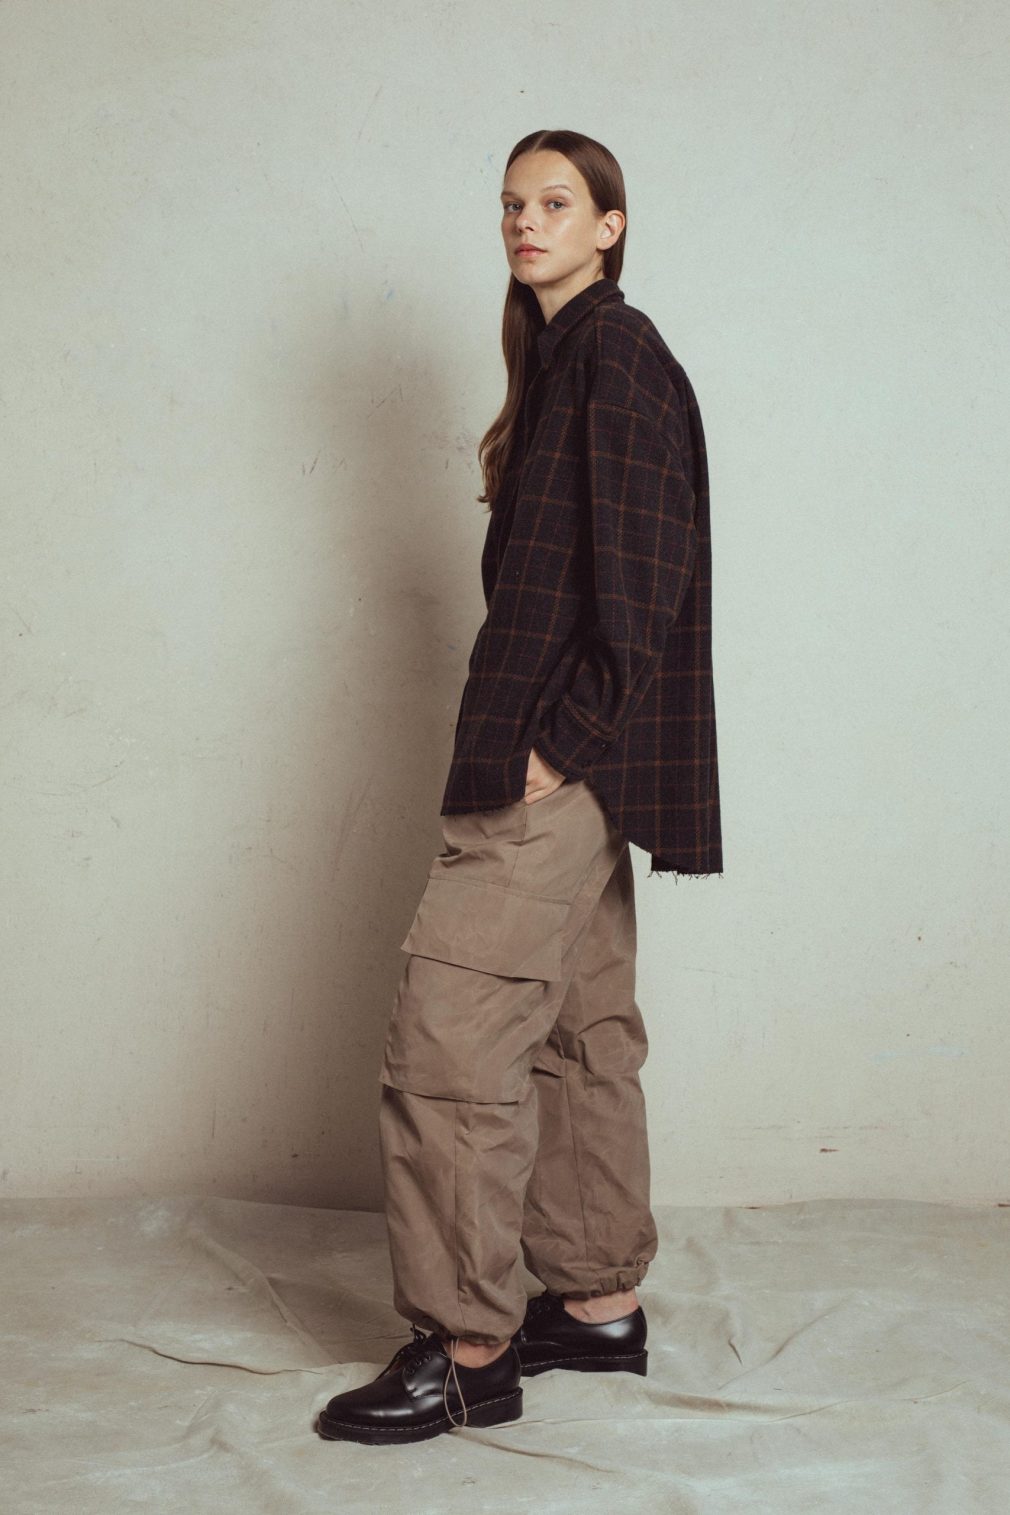 unlabel cargo pants mattise, italian stif fabric 70% polyamide, 30% cotton, loose straight fit,  ide trousers with big side pockets, waistband and bottom gathered with elastic strap.